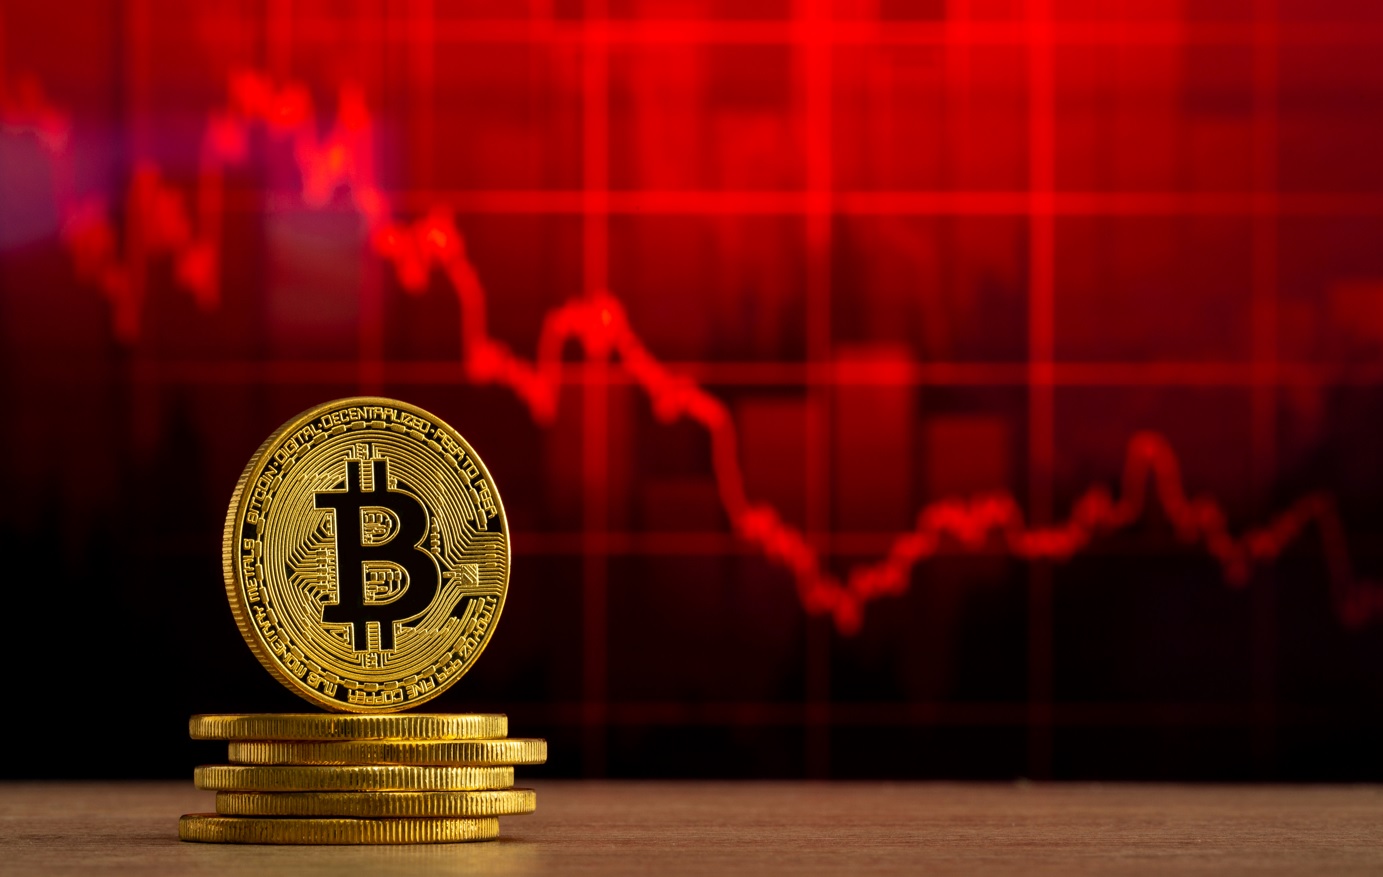 Where does Bitcoin go next after dropping below $40k again?